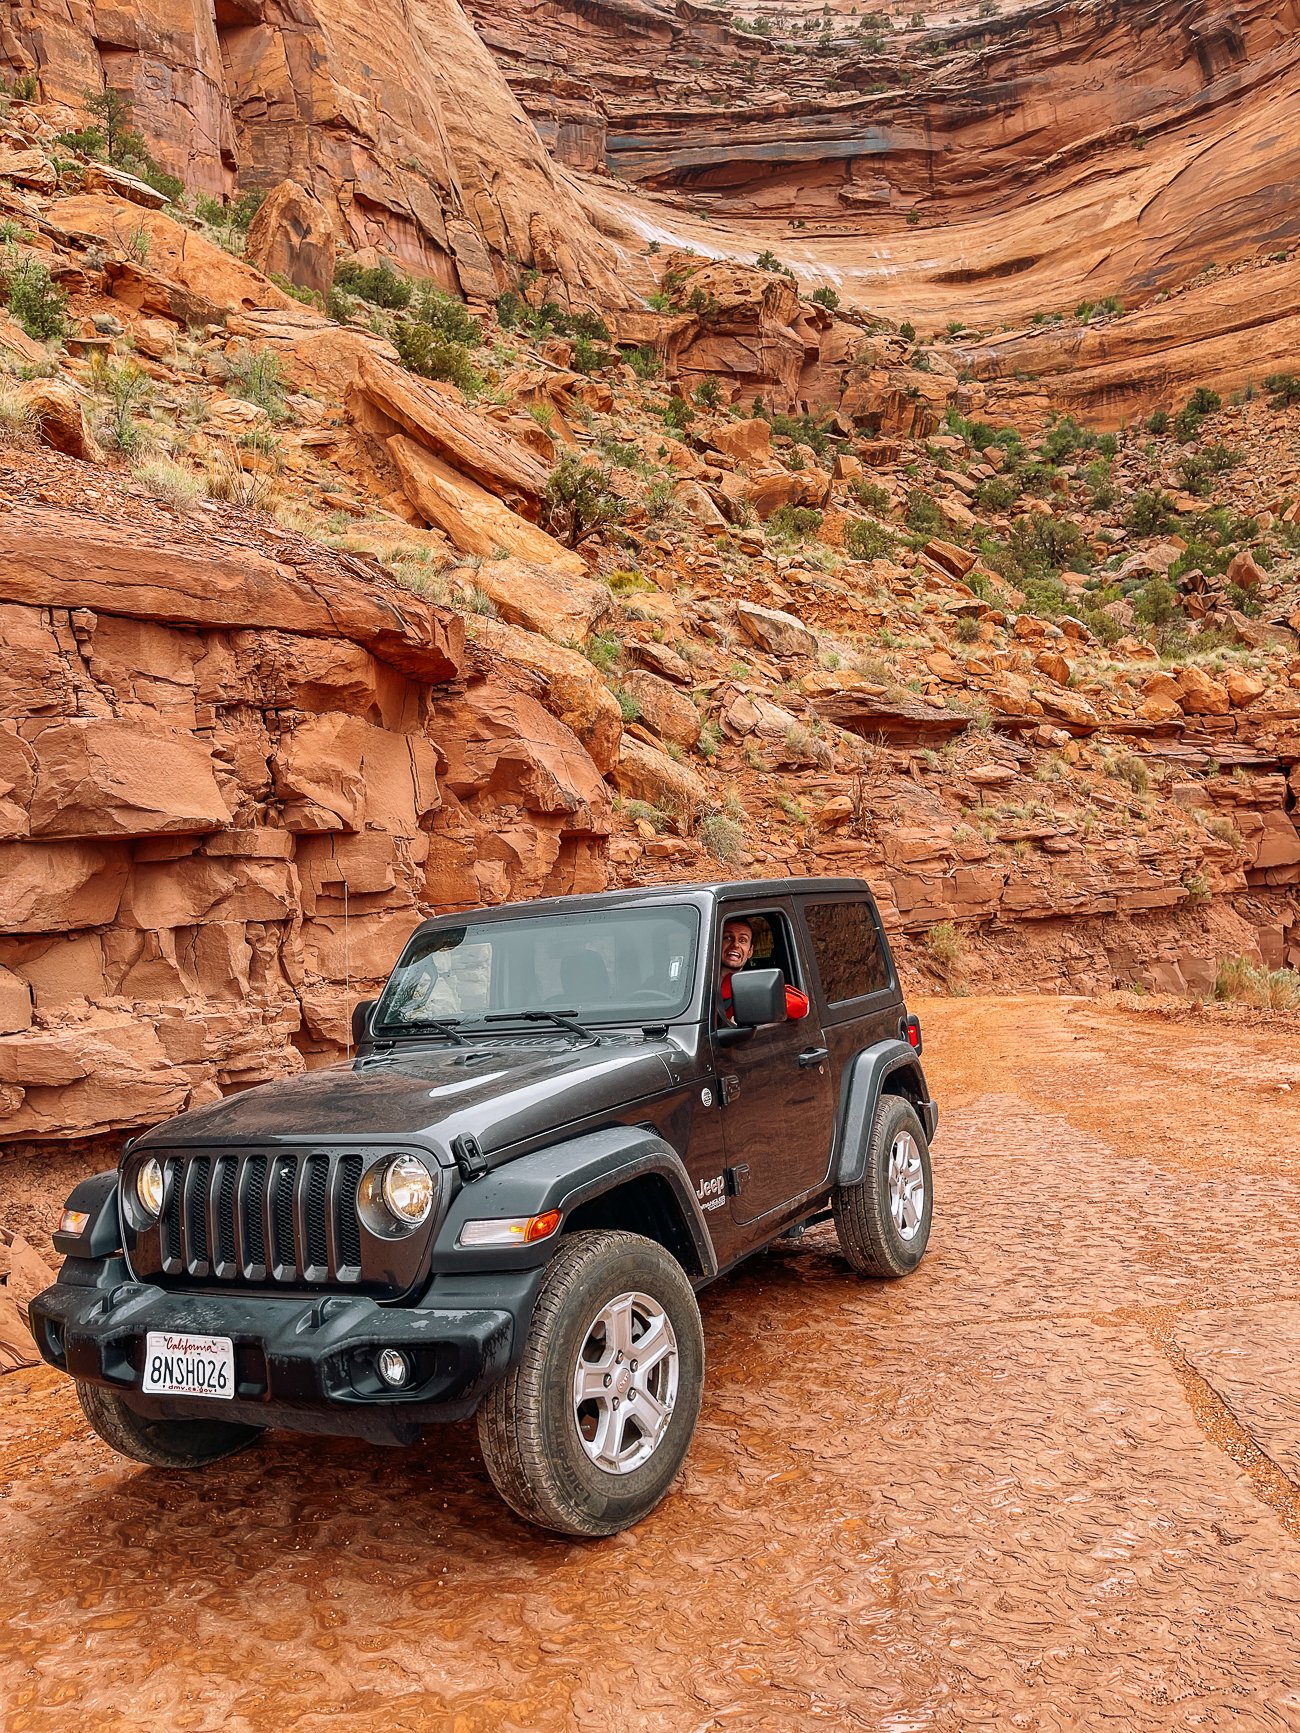 Justin driving Jeep on Shafer Trail